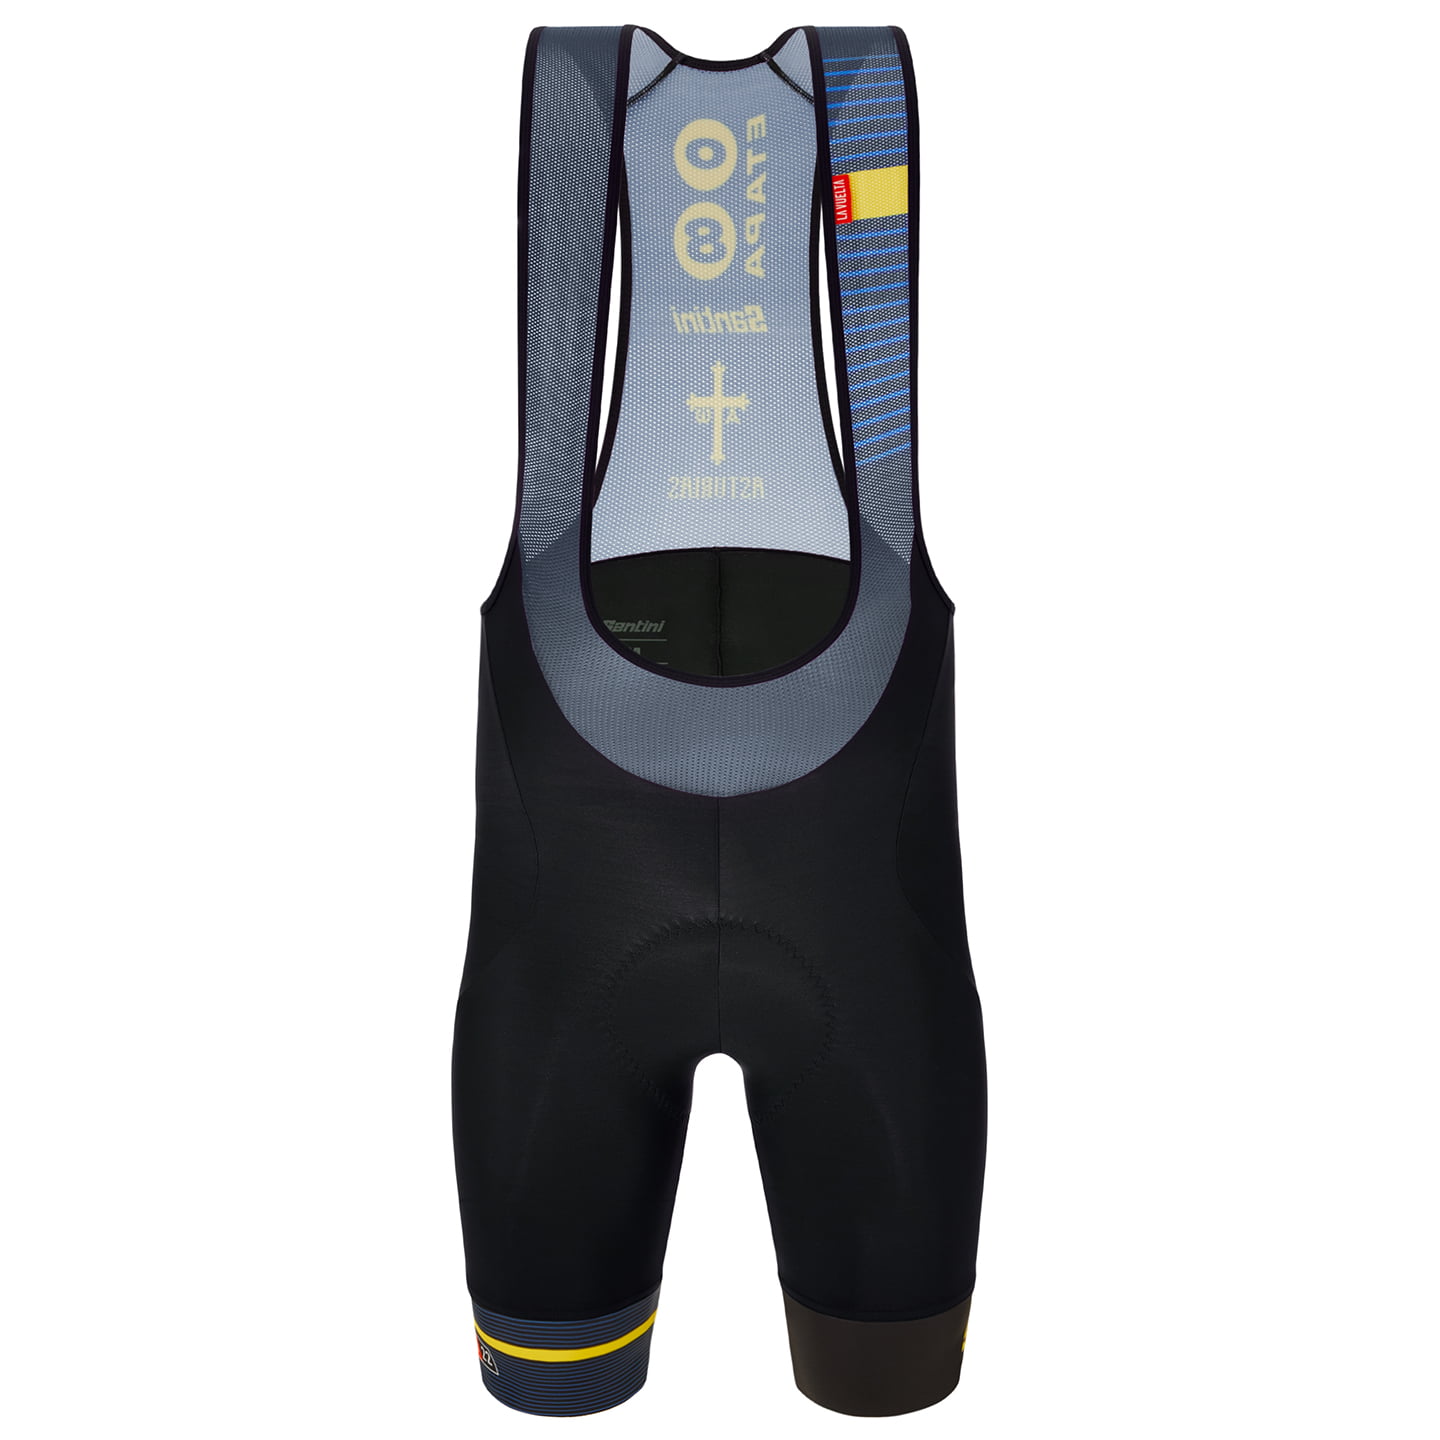 LA VUELTA Asturias 2022 Bib Shorts, for men, size XL, Cycle trousers, Cycle clothing